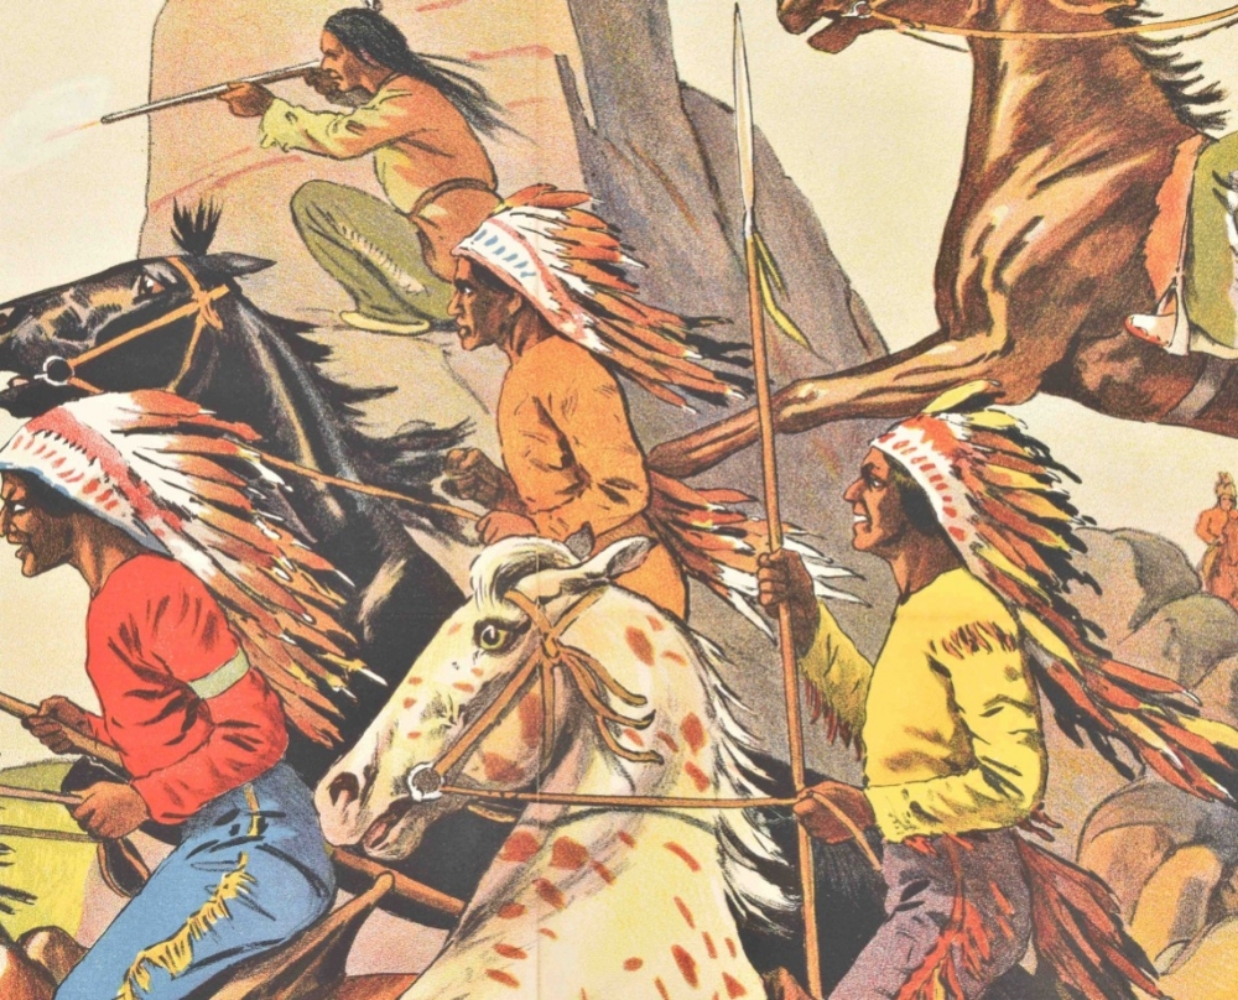 "Battle between cowboys and Native Americans" - Image 5 of 7